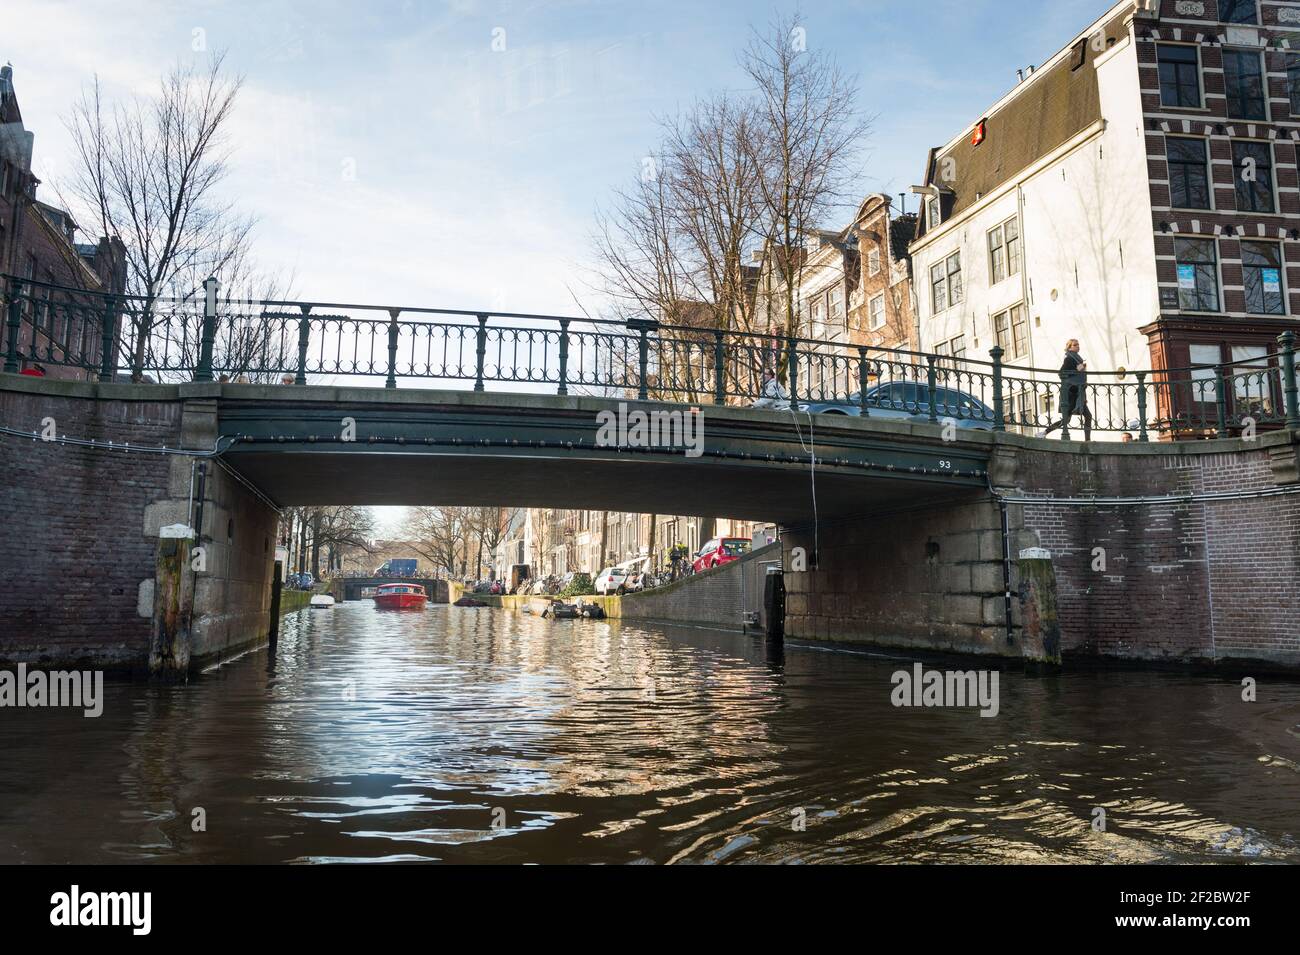 The junction of Leidsegracht and Prinsengracht, Amsterdam, Netherlands. Stock Photo